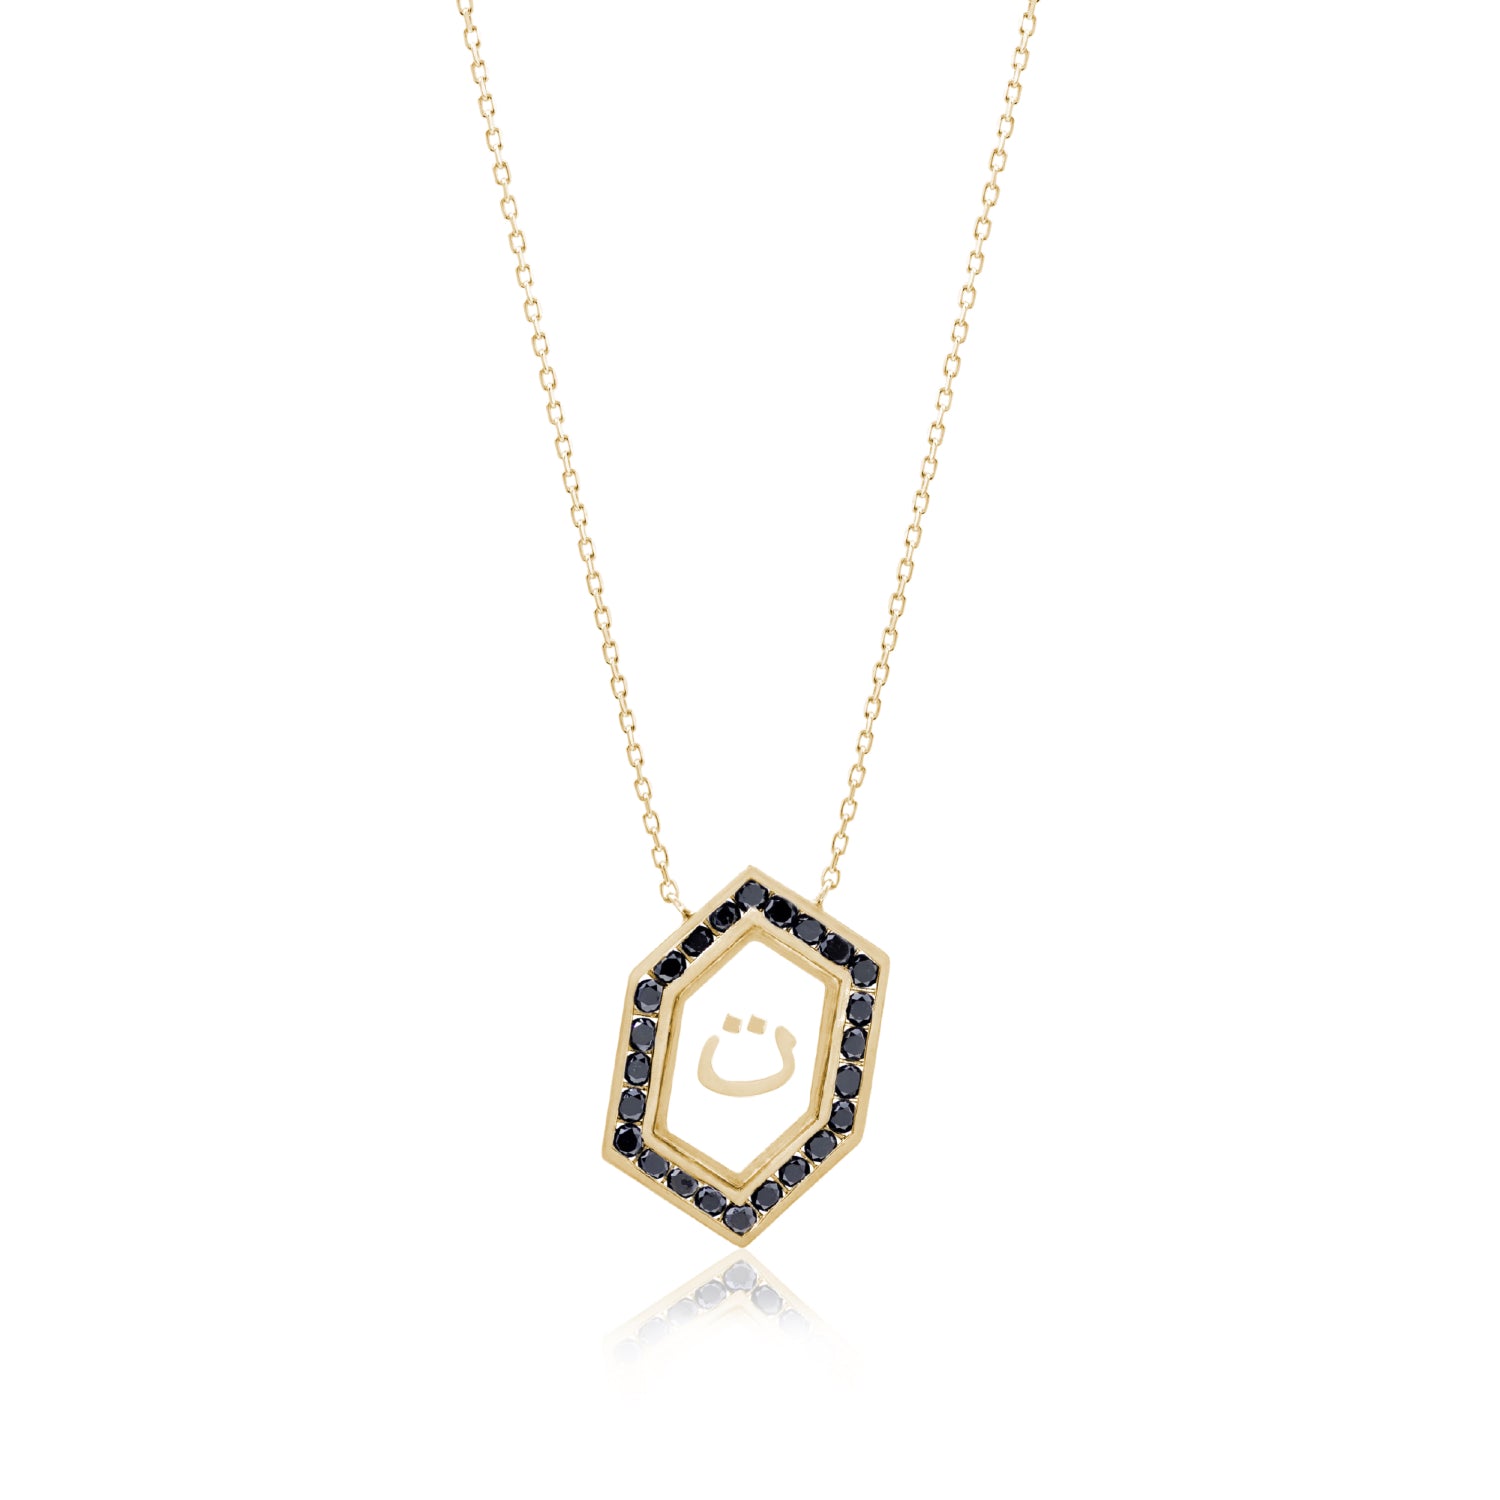 Qamoos 1.0 Letter ت Black Diamond Necklace in Yellow Gold